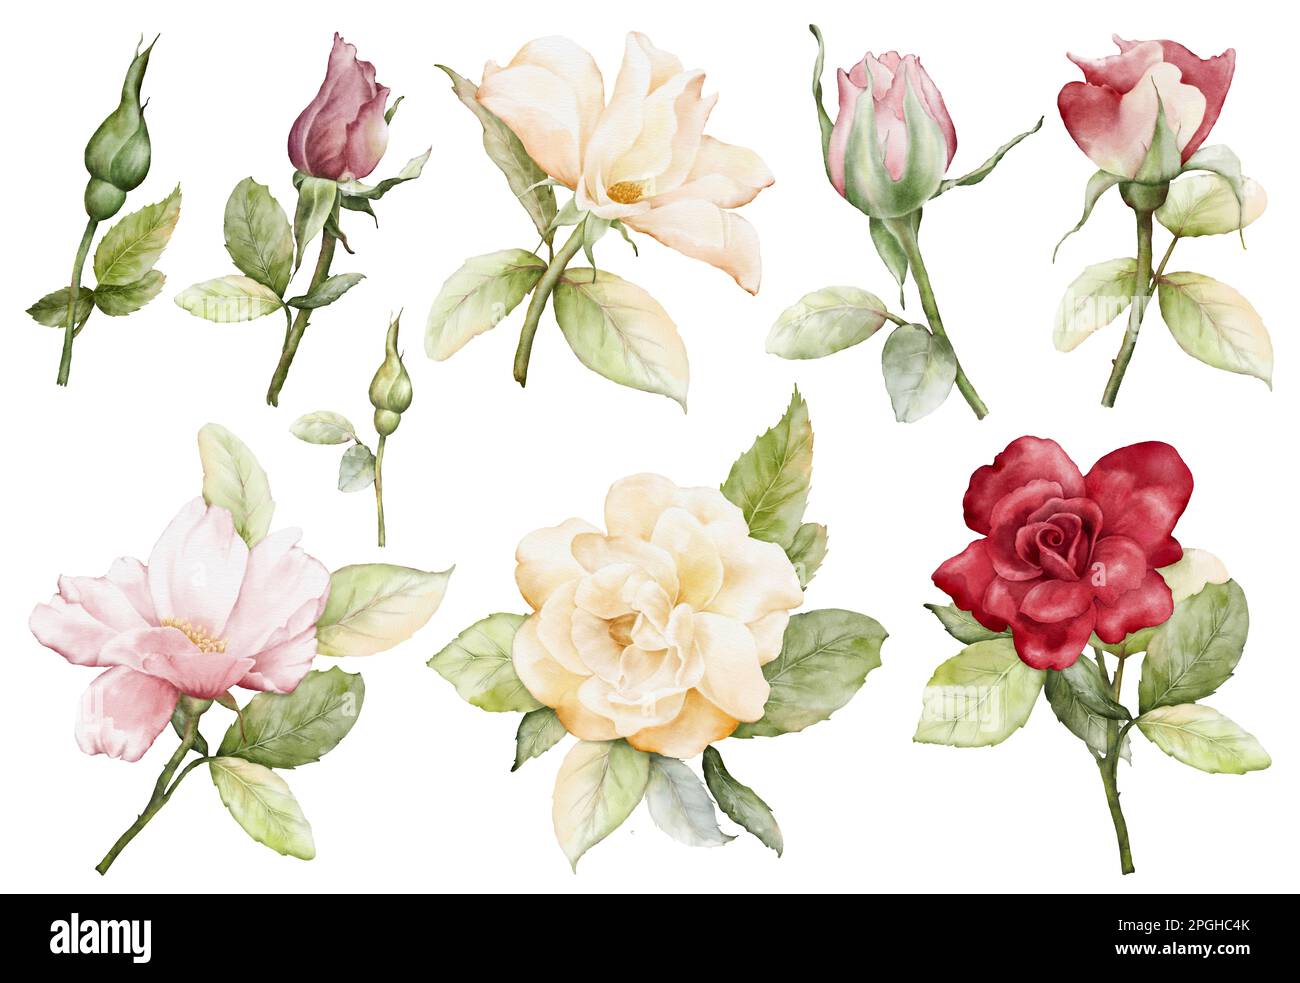 Watercolor roses illustration set. Roses flower and green leaves elements collection isolated on white background. Suitable for decoration, bouquet, w Stock Photo